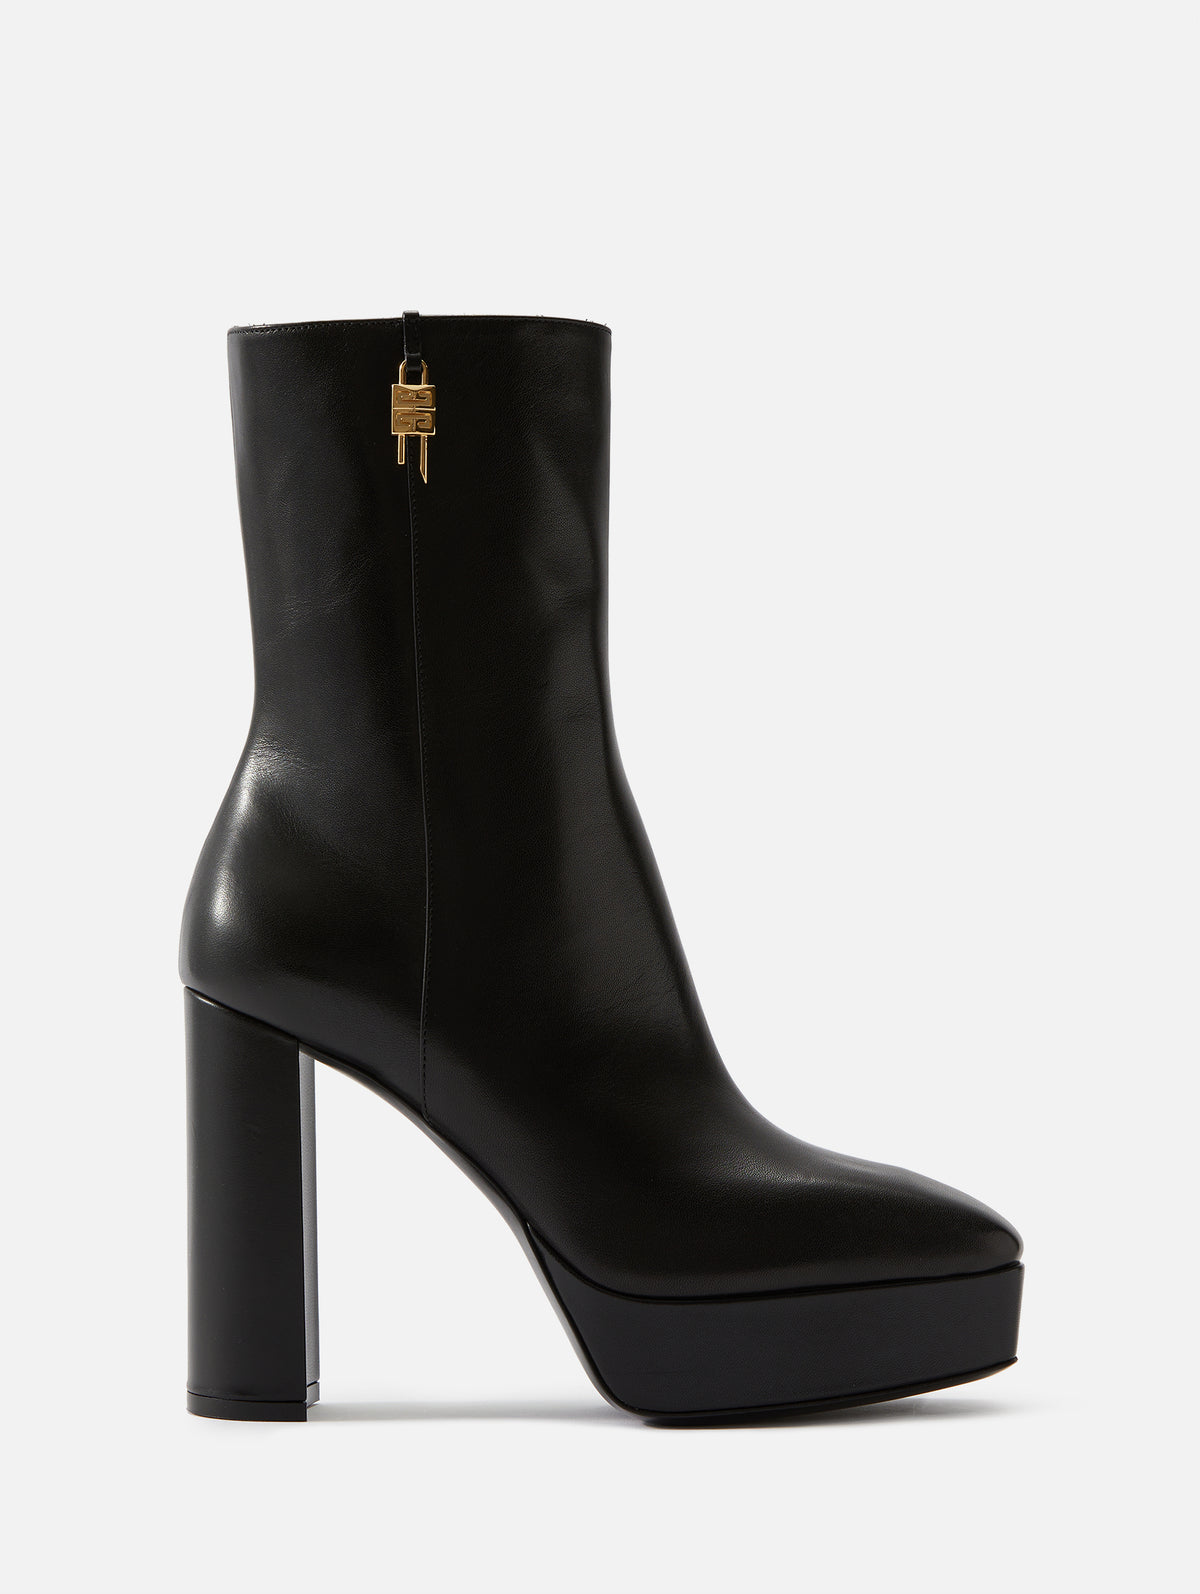 view 1 - G Lock Platform Ankle Boot 115mm